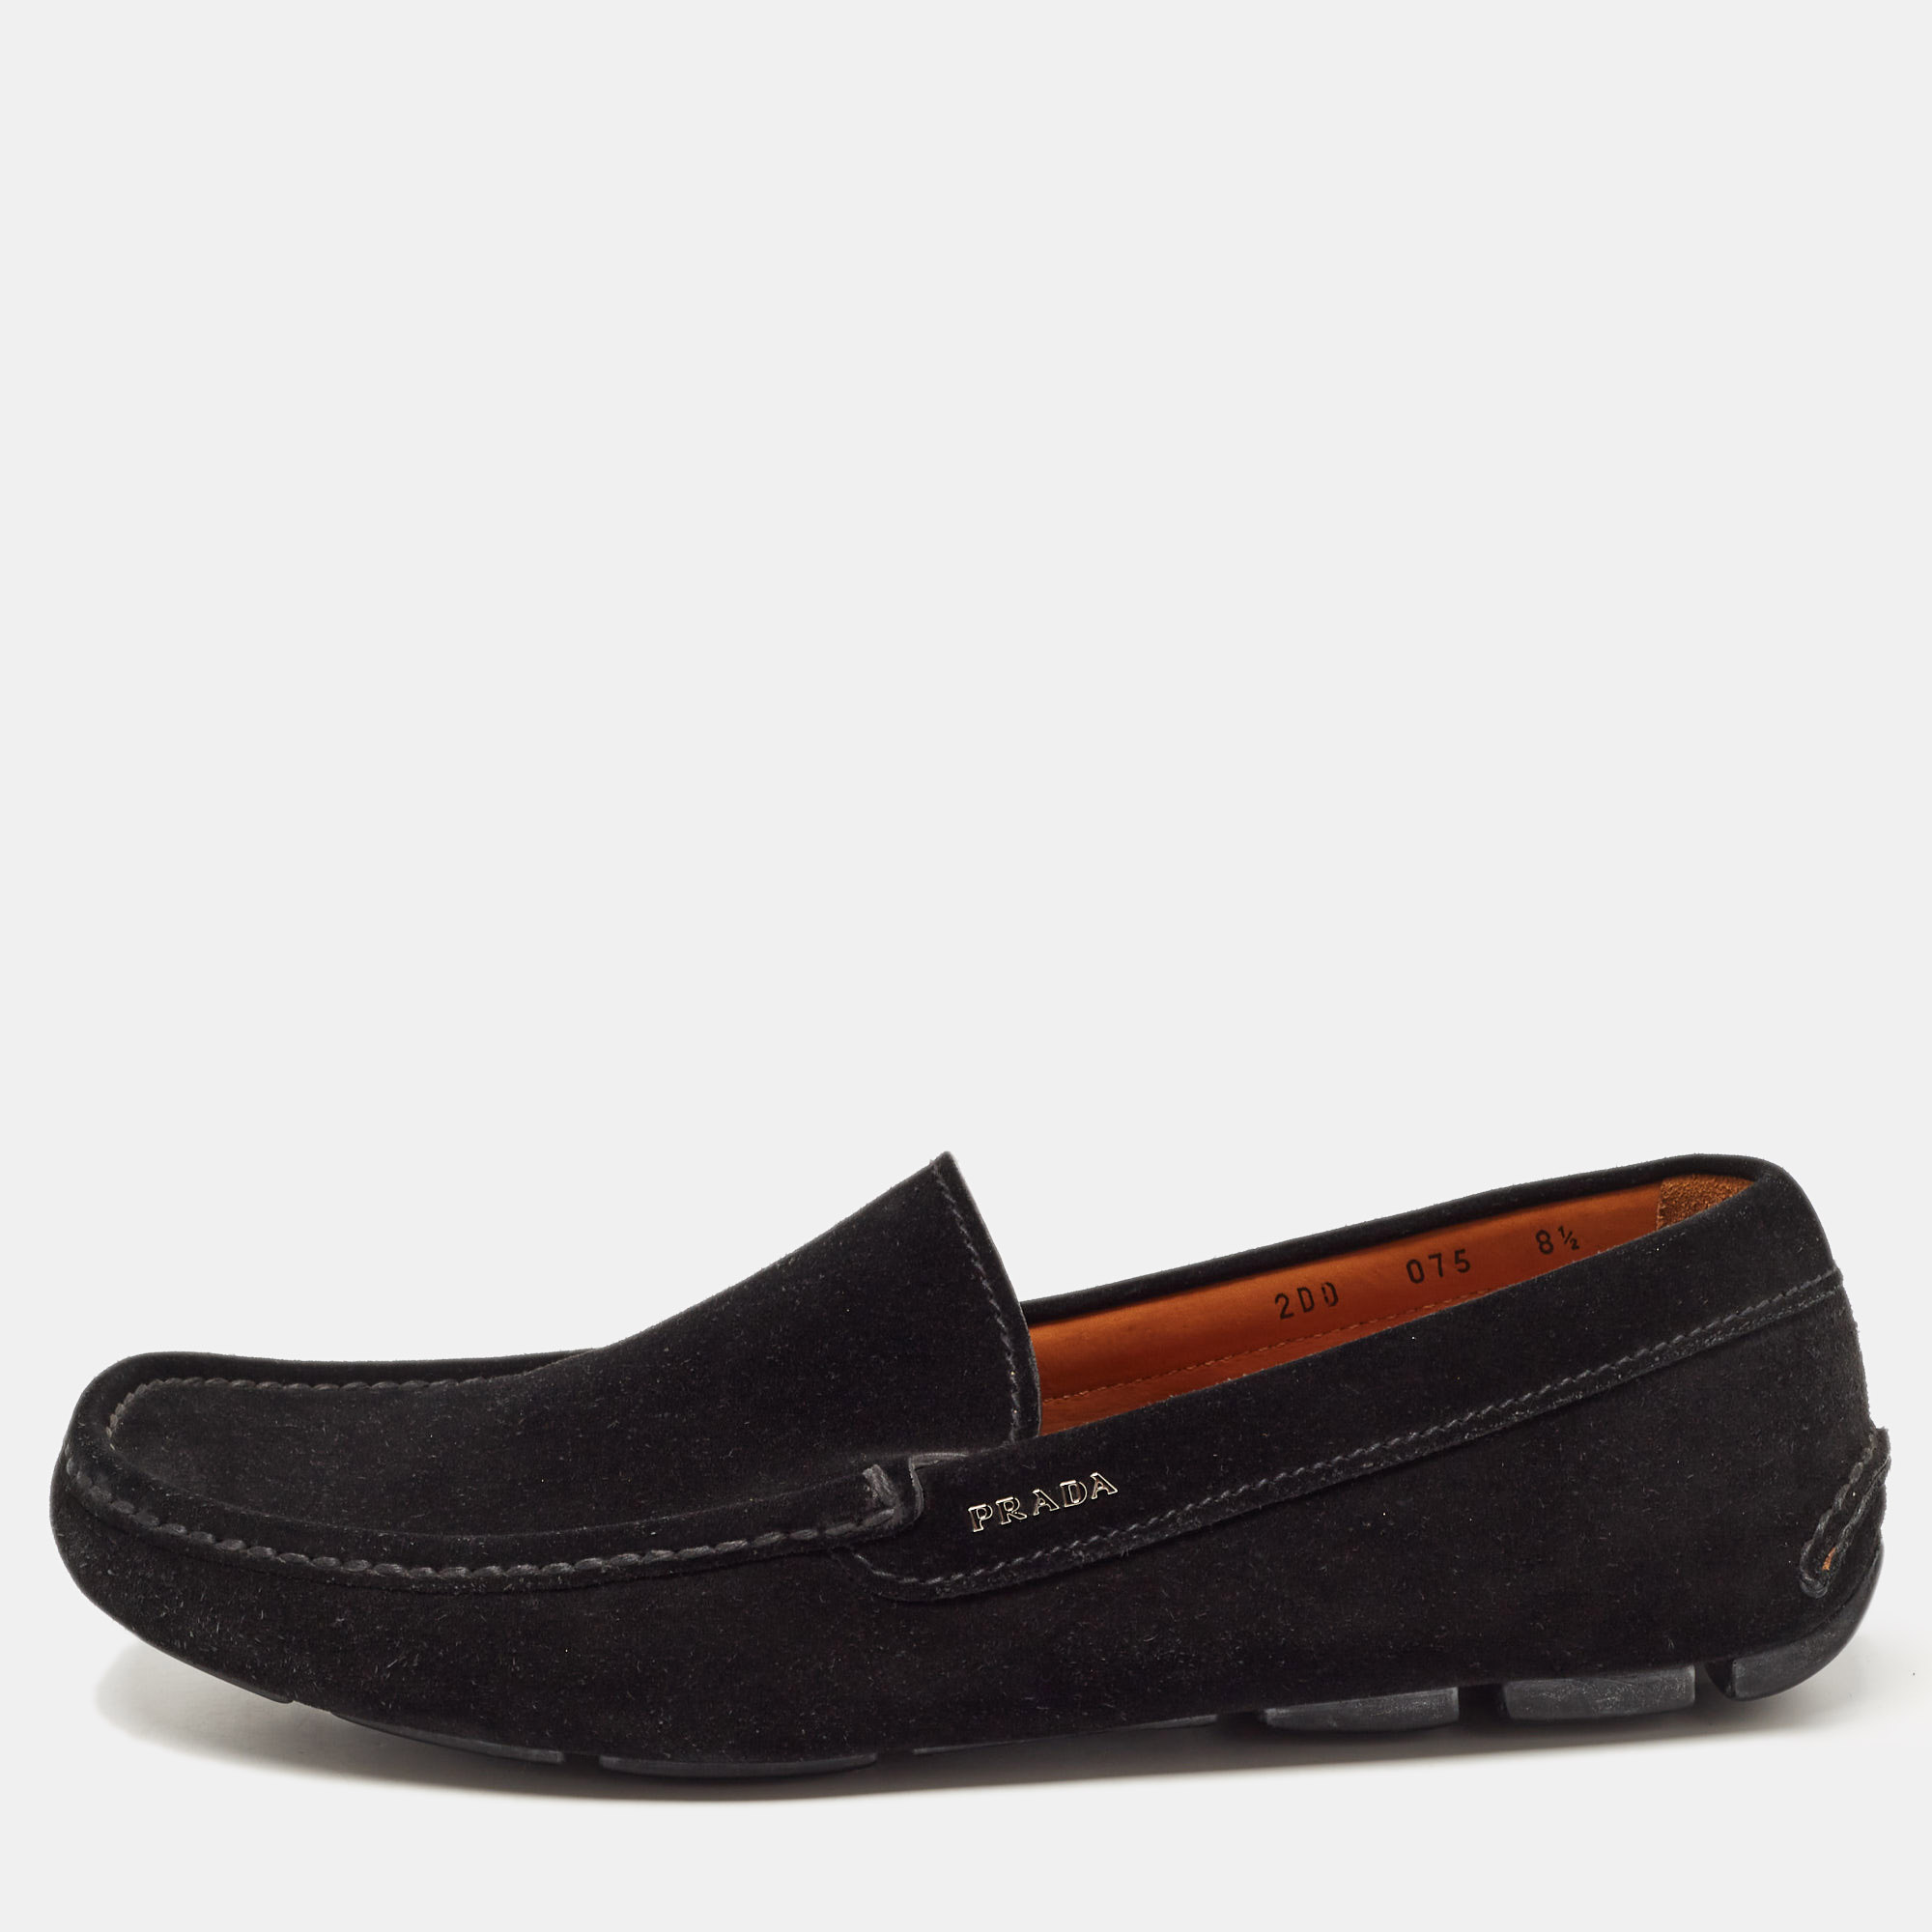 Pre-owned Prada Black Suede Penny Loafers Size 42.5